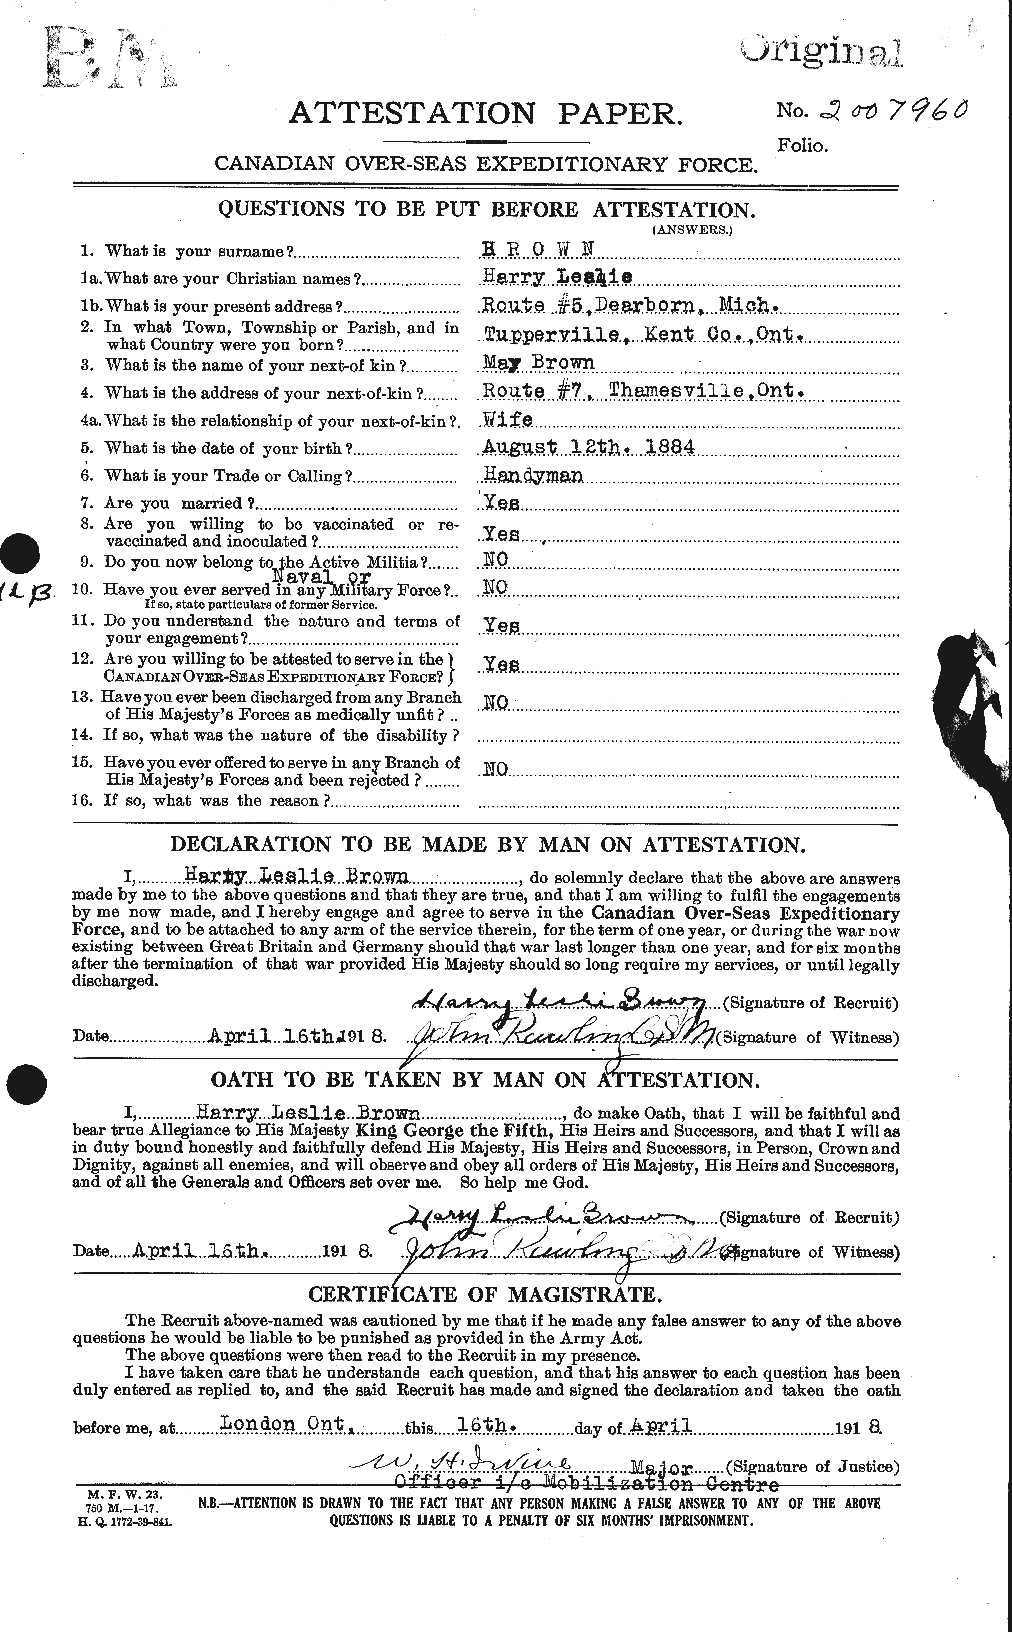 Personnel Records of the First World War - CEF 265458a